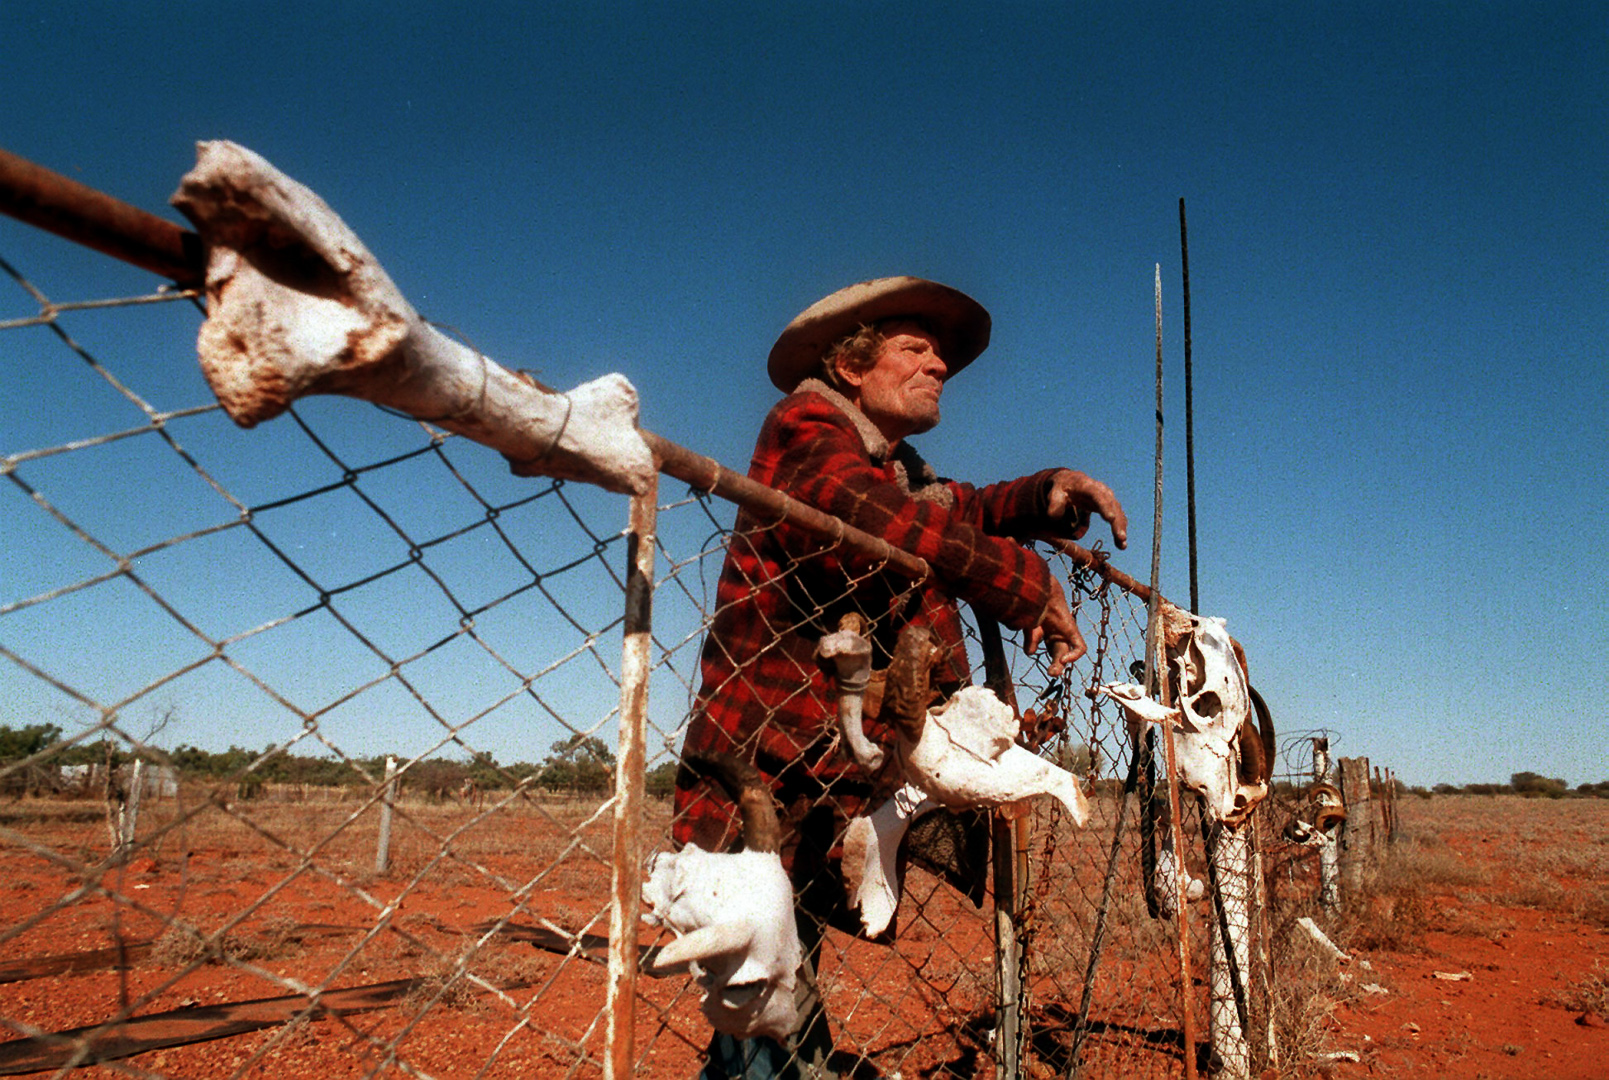 The late "The Wingcommander" keeping bones on the fence at Windorah western Qld, 1998.